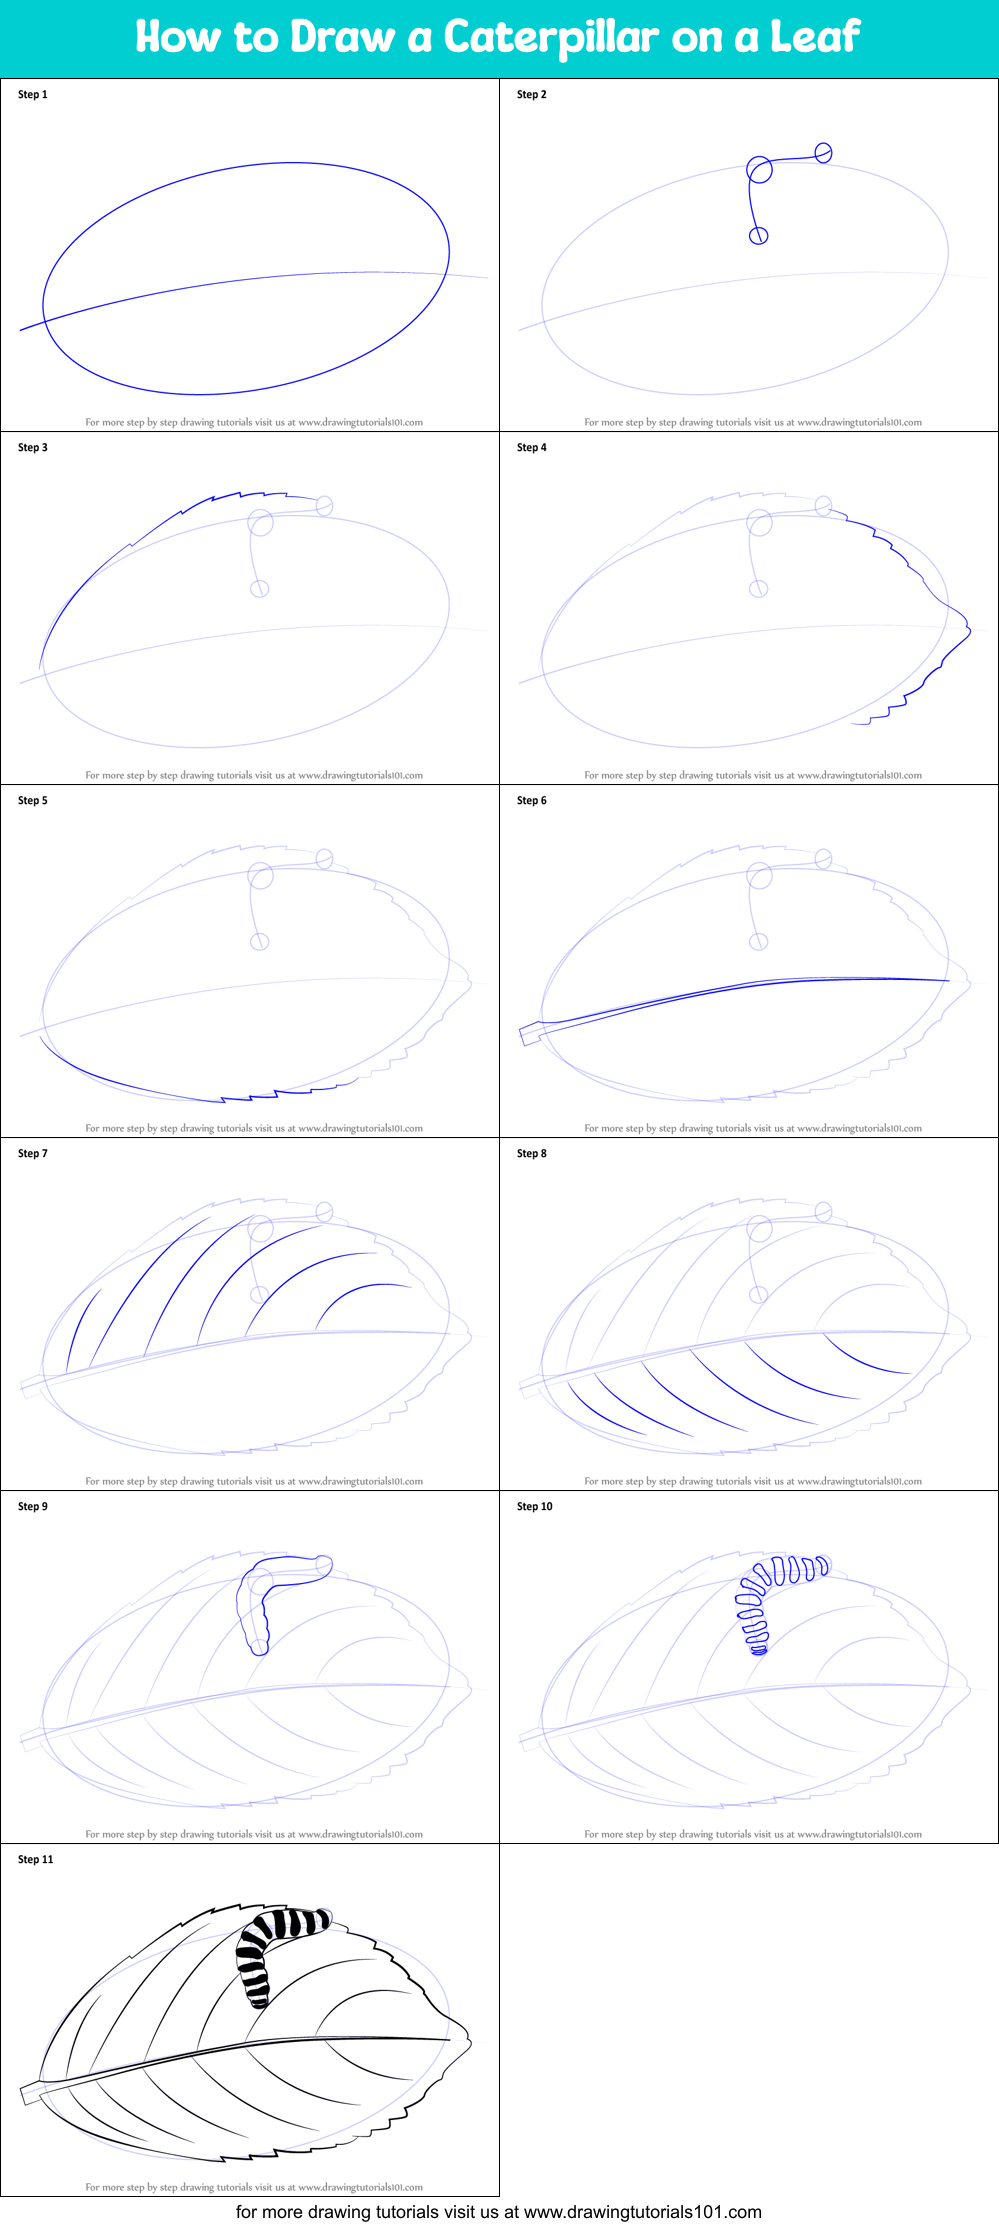 How To Draw A Caterpillar On A Leaf Printable Step By Step